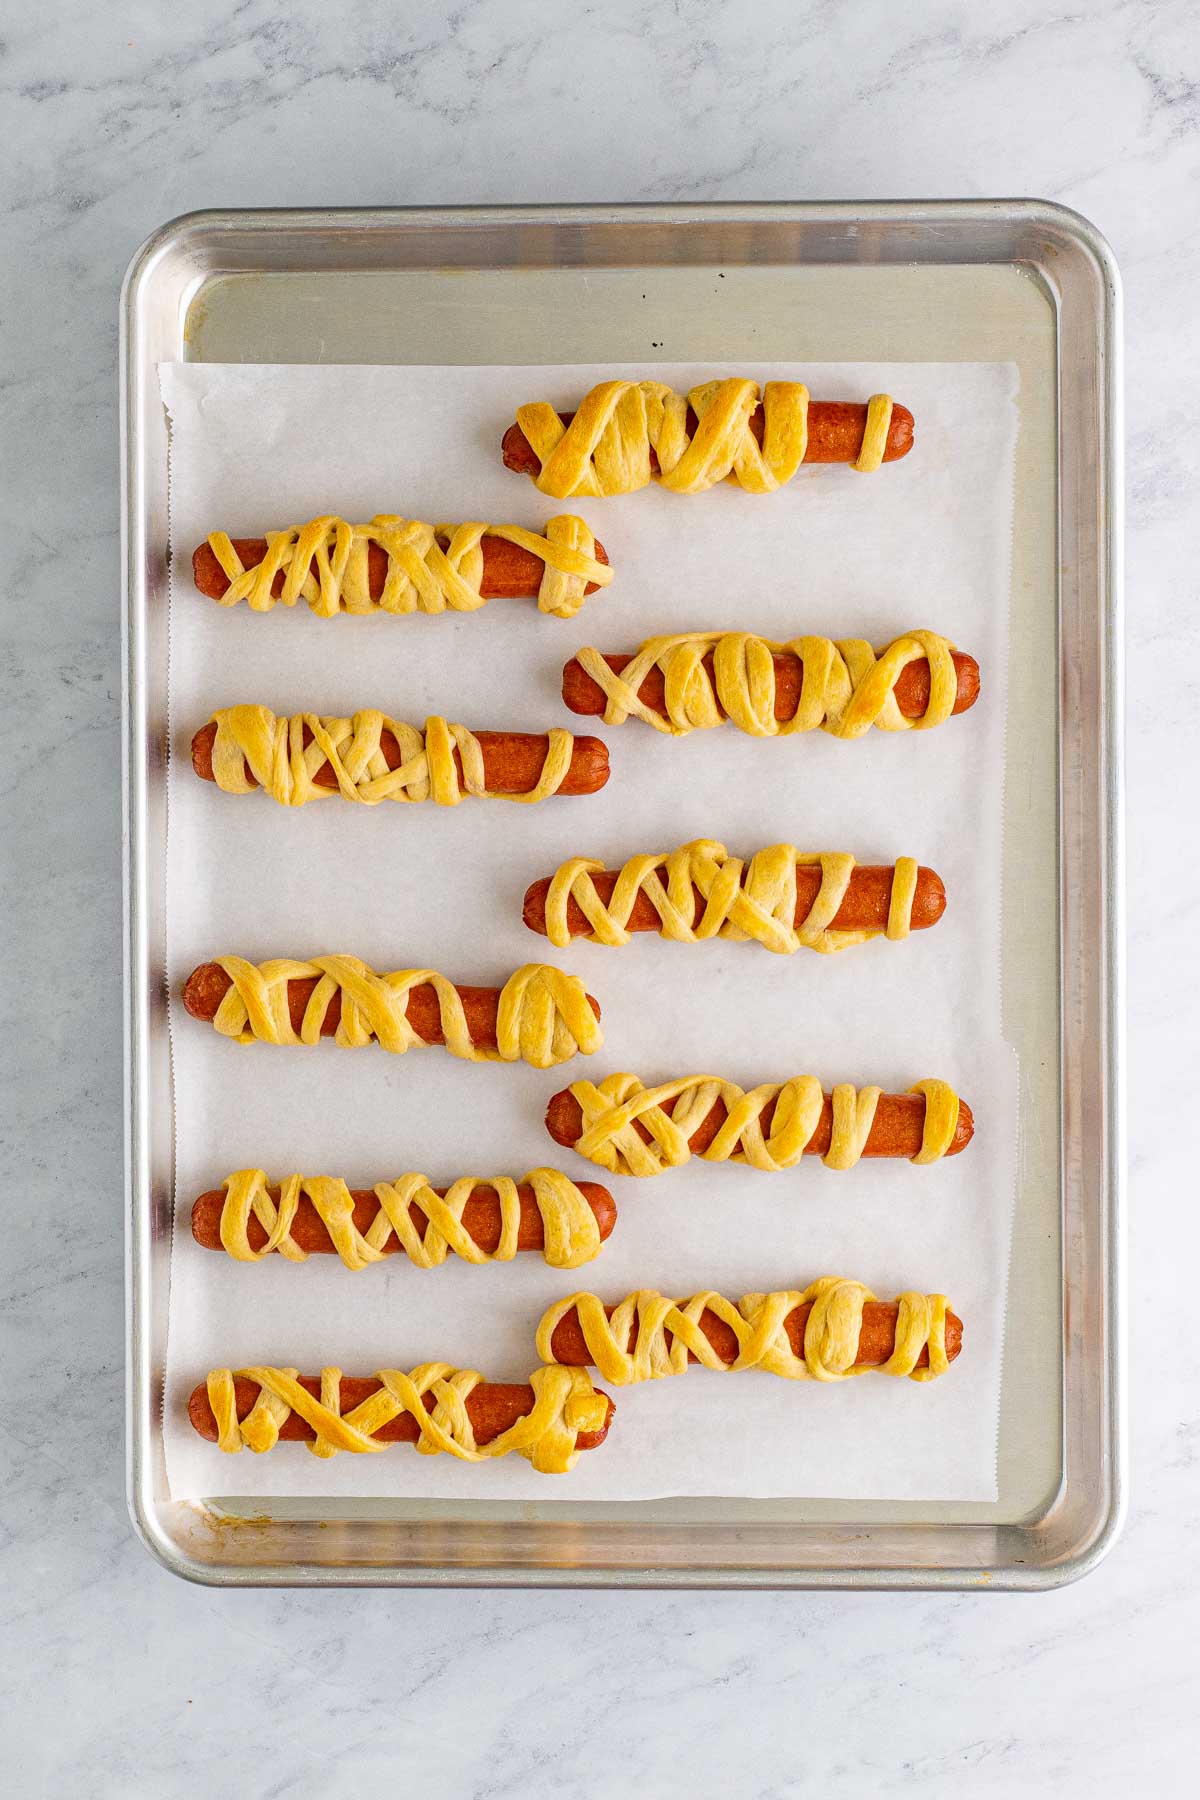 unbaked mummy hot dogs on a baking sheet